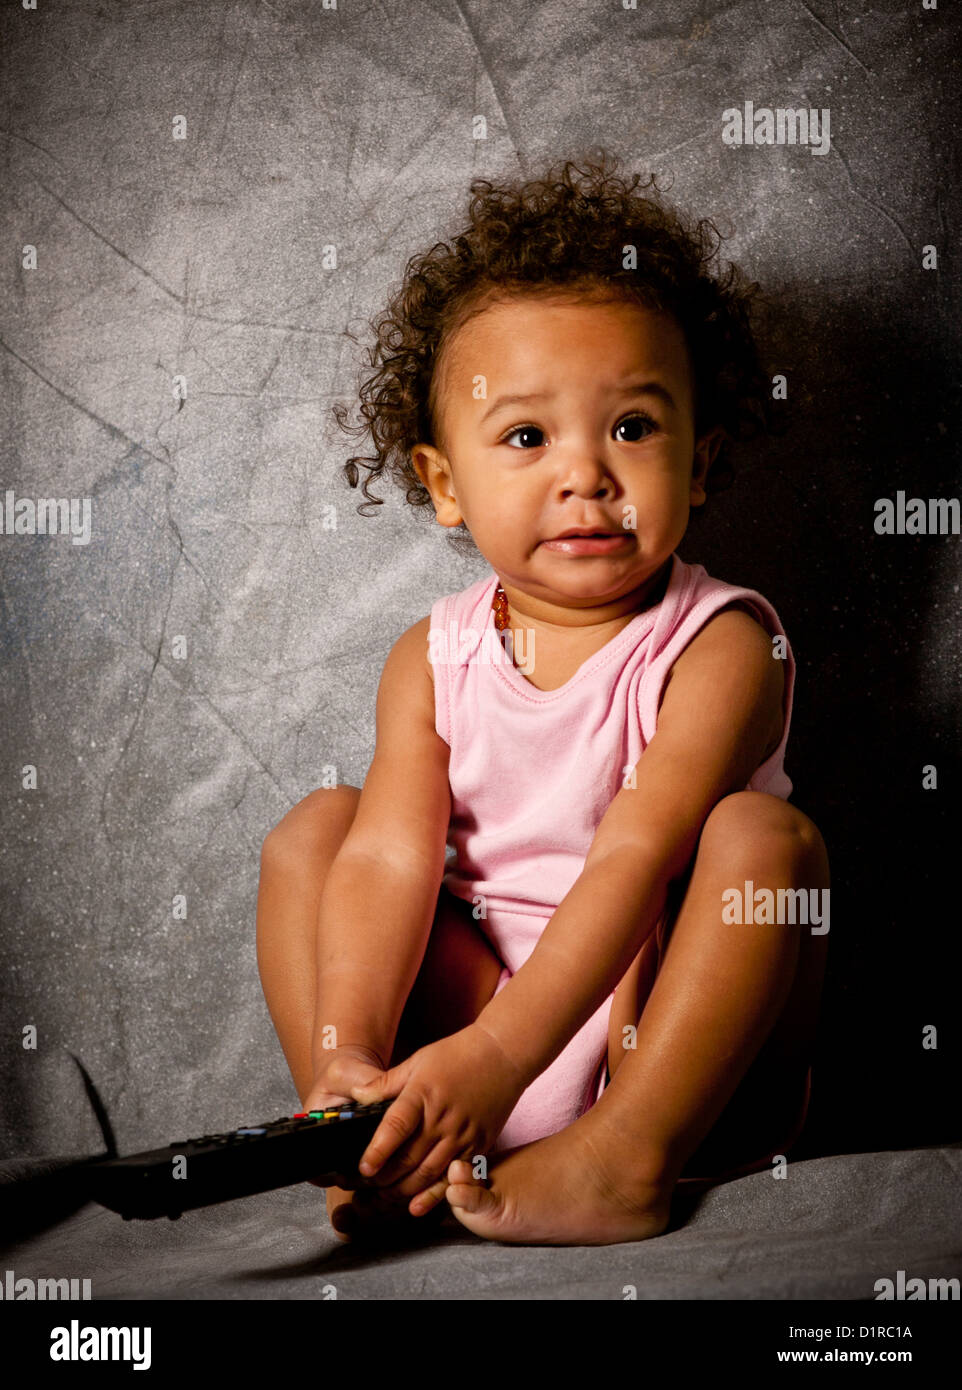 Studio Portrait Of A Cute Baby Girl 18 Months Mixed Race Stock